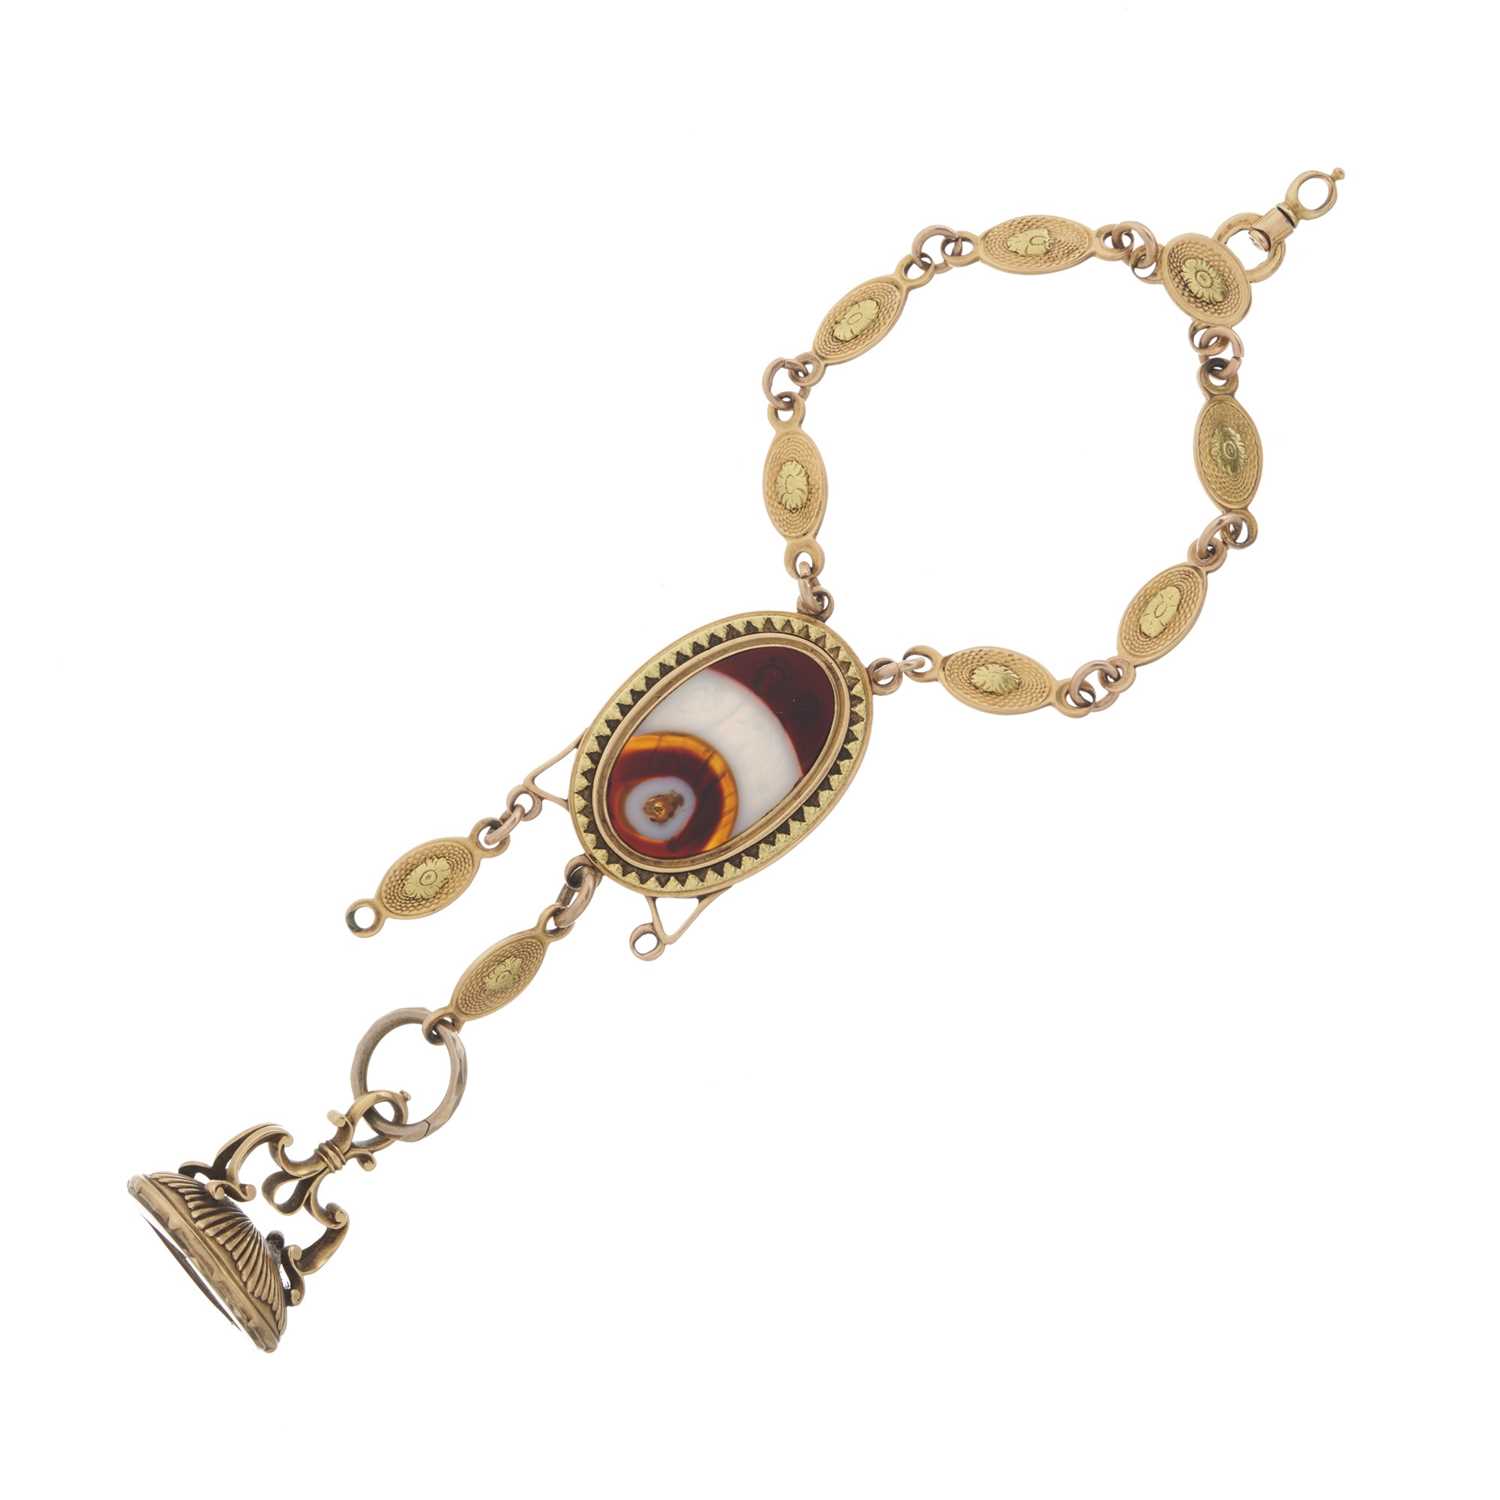 Lot 28 - A mid to late 19th century gold agate and citrine intaglio chatelaine